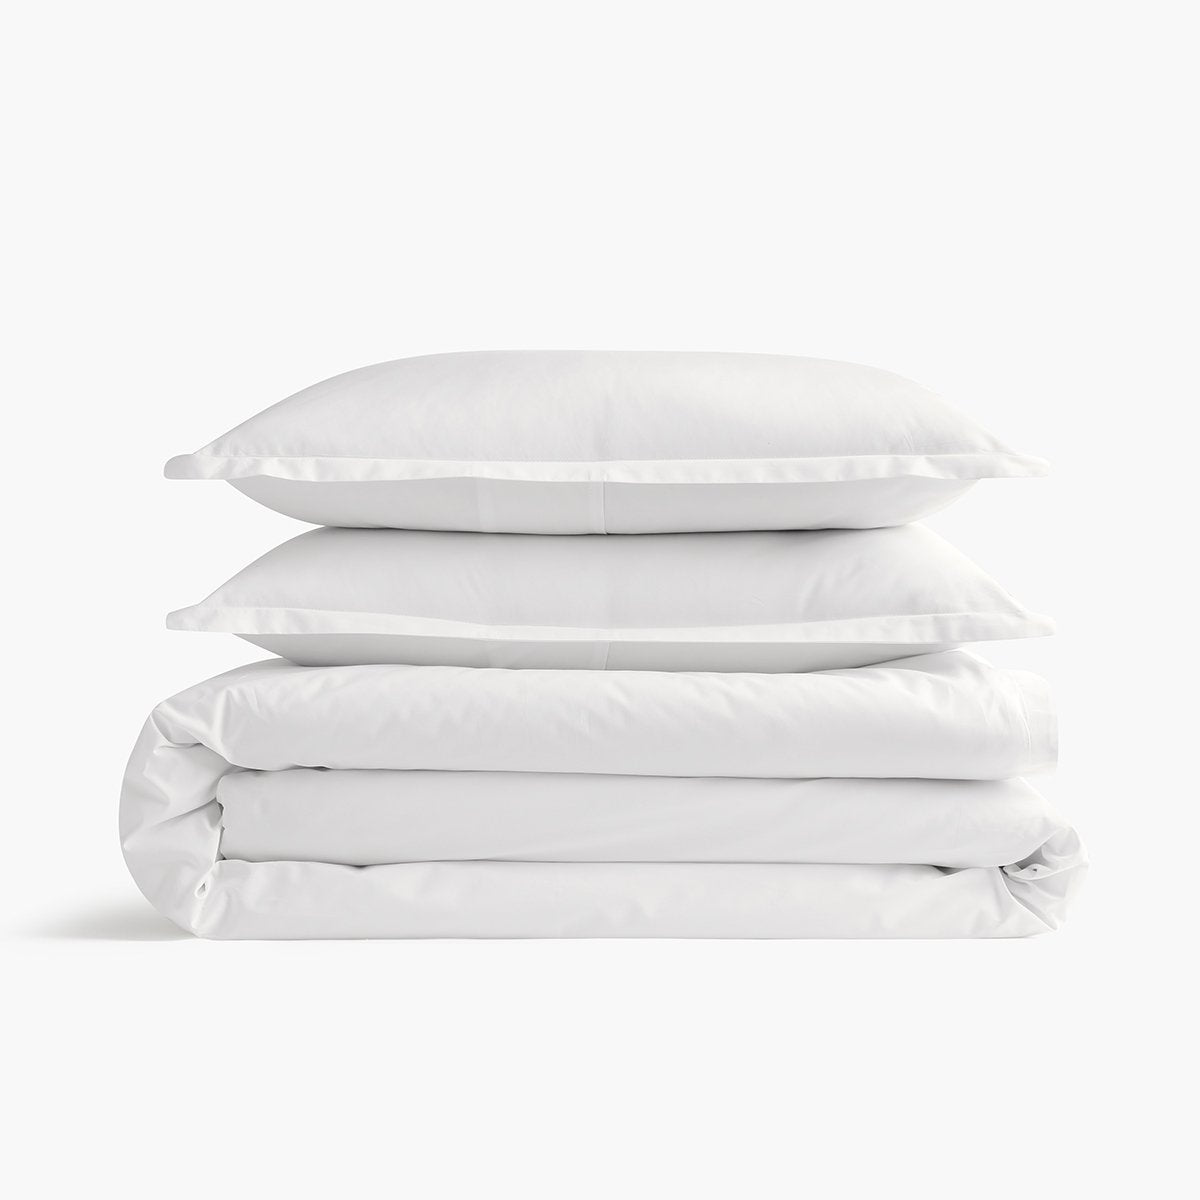 Berkshire Blanket 300 Thread Count Percale Weave Bedding Set,100% Cotton  Sheets & Pillowcases,4 PC S…See more Berkshire Blanket 300 Thread Count